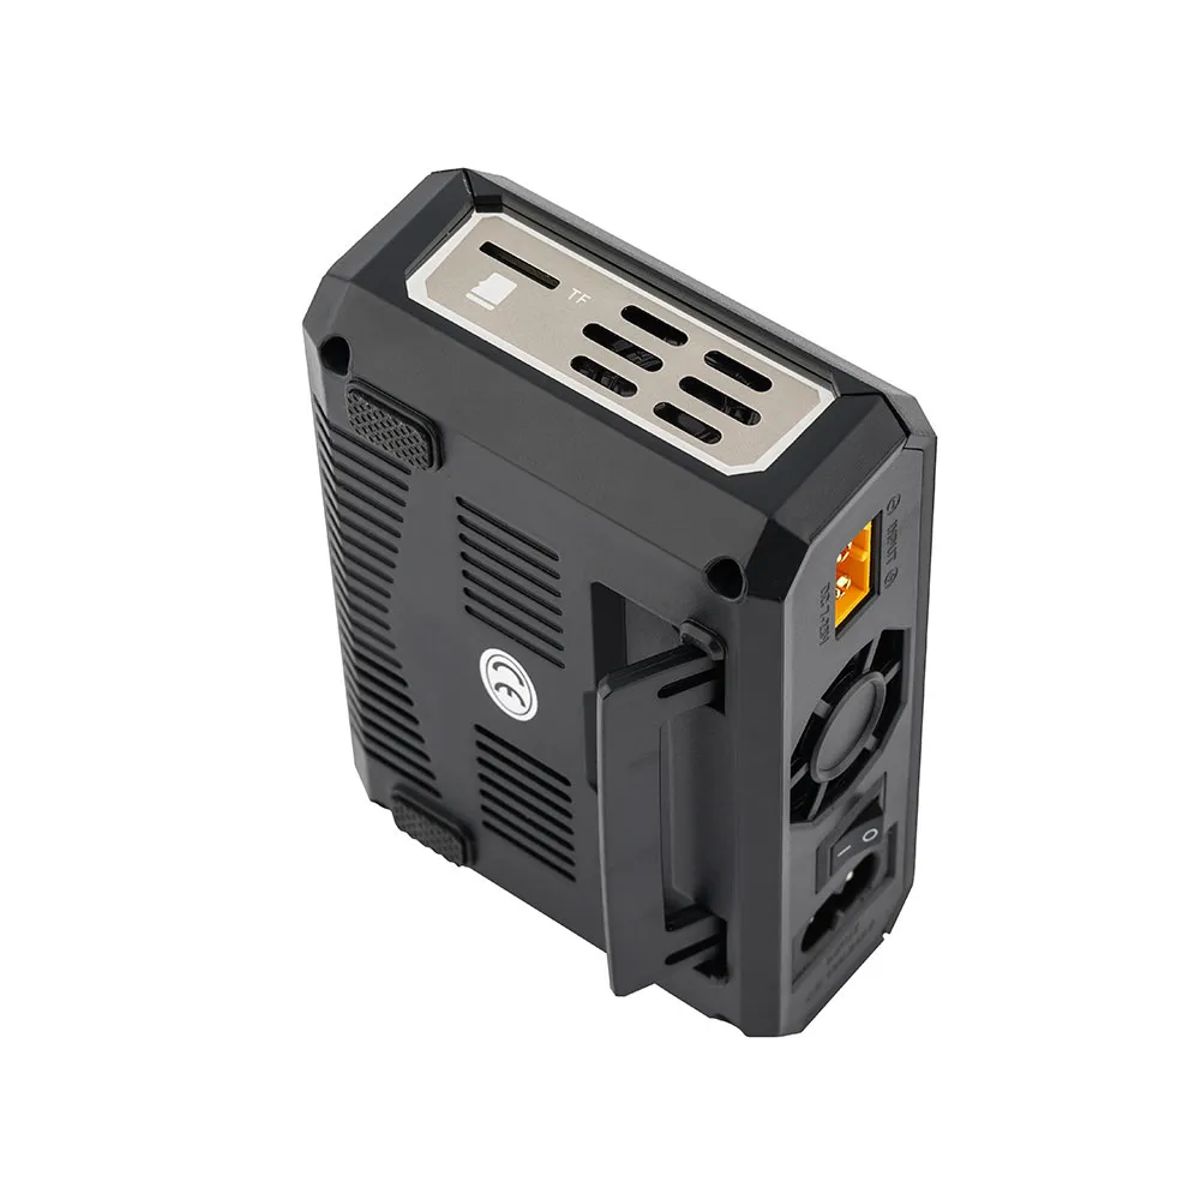   ToolkitRC M7AC Multi Charger